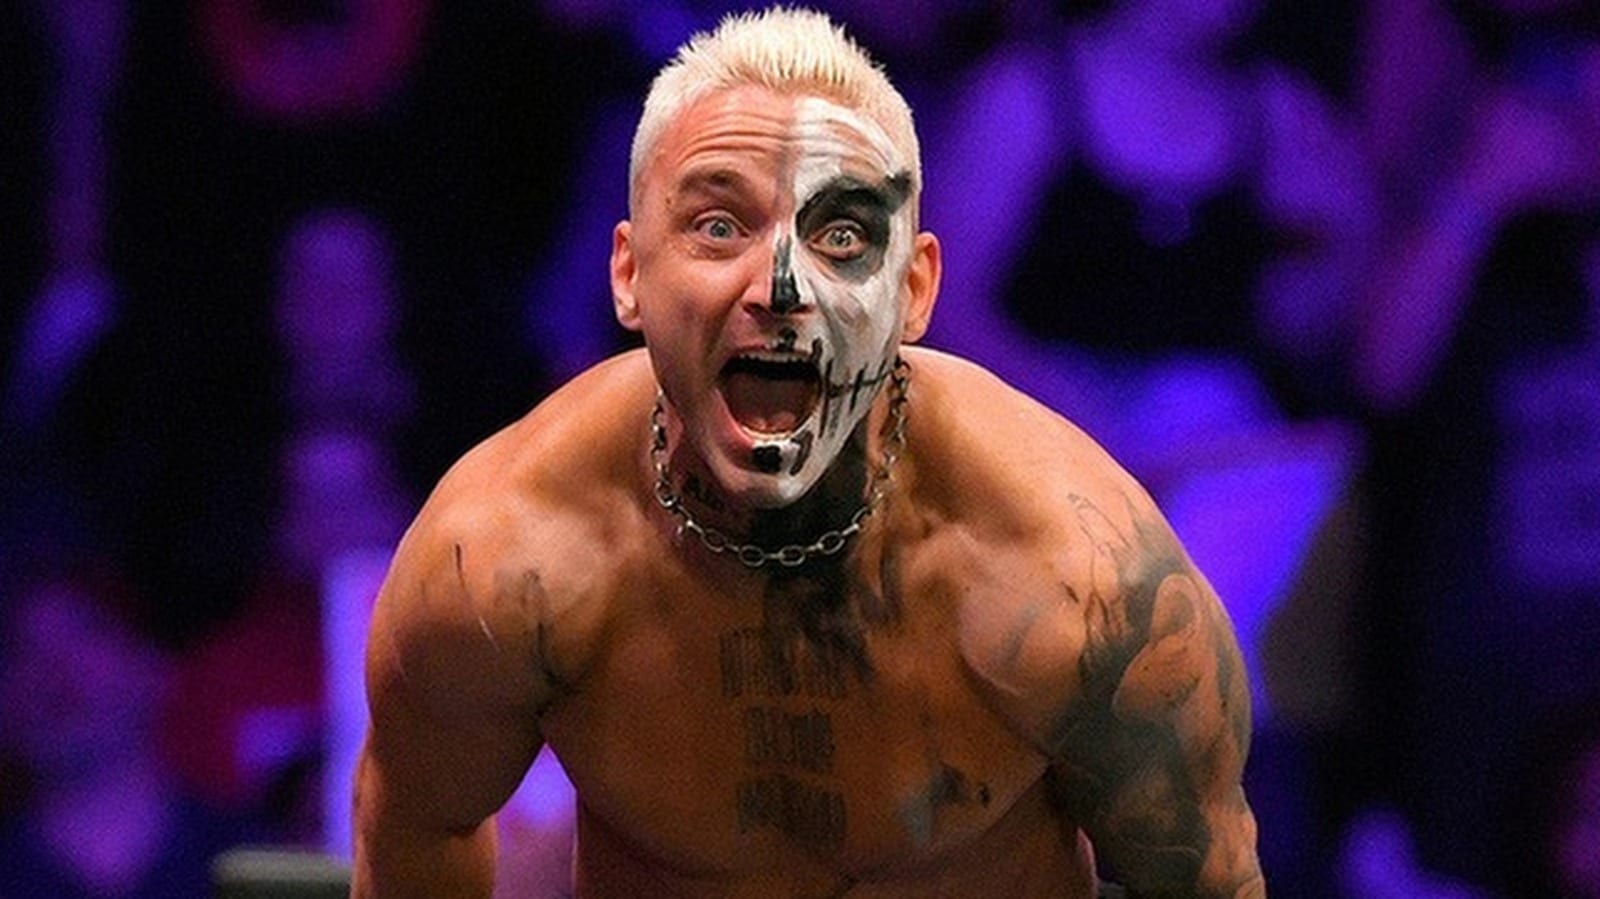 Darby Allin Makes a Comeback on AEW Dynamite – Here’s His Post-Show Statement